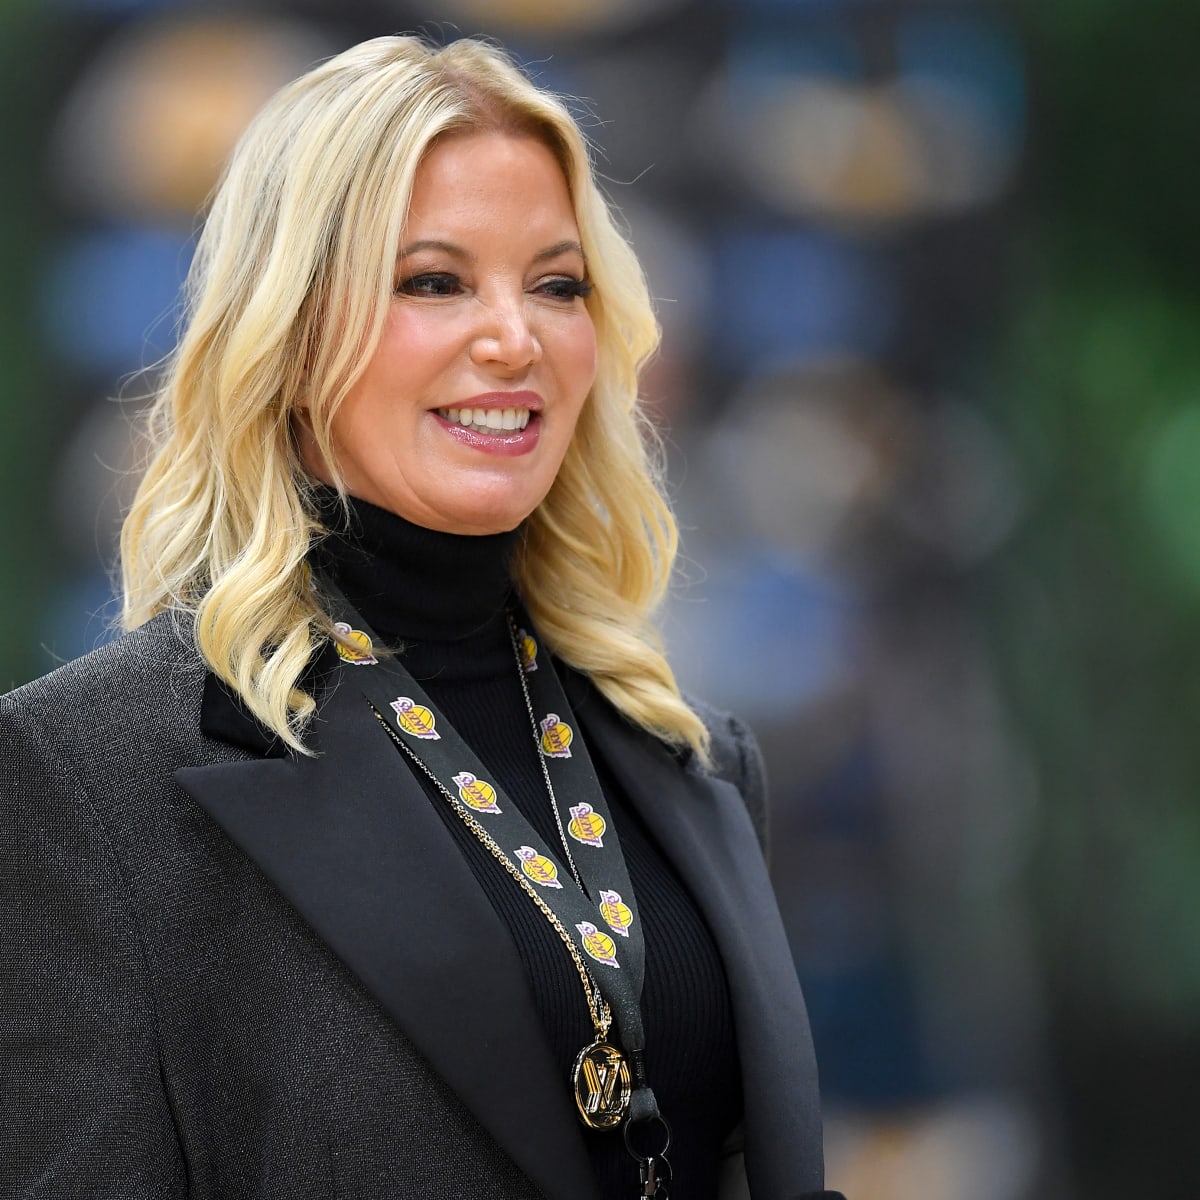 Los Angeles Lakers owner Jeanie Buss, 61, confirms engagement to